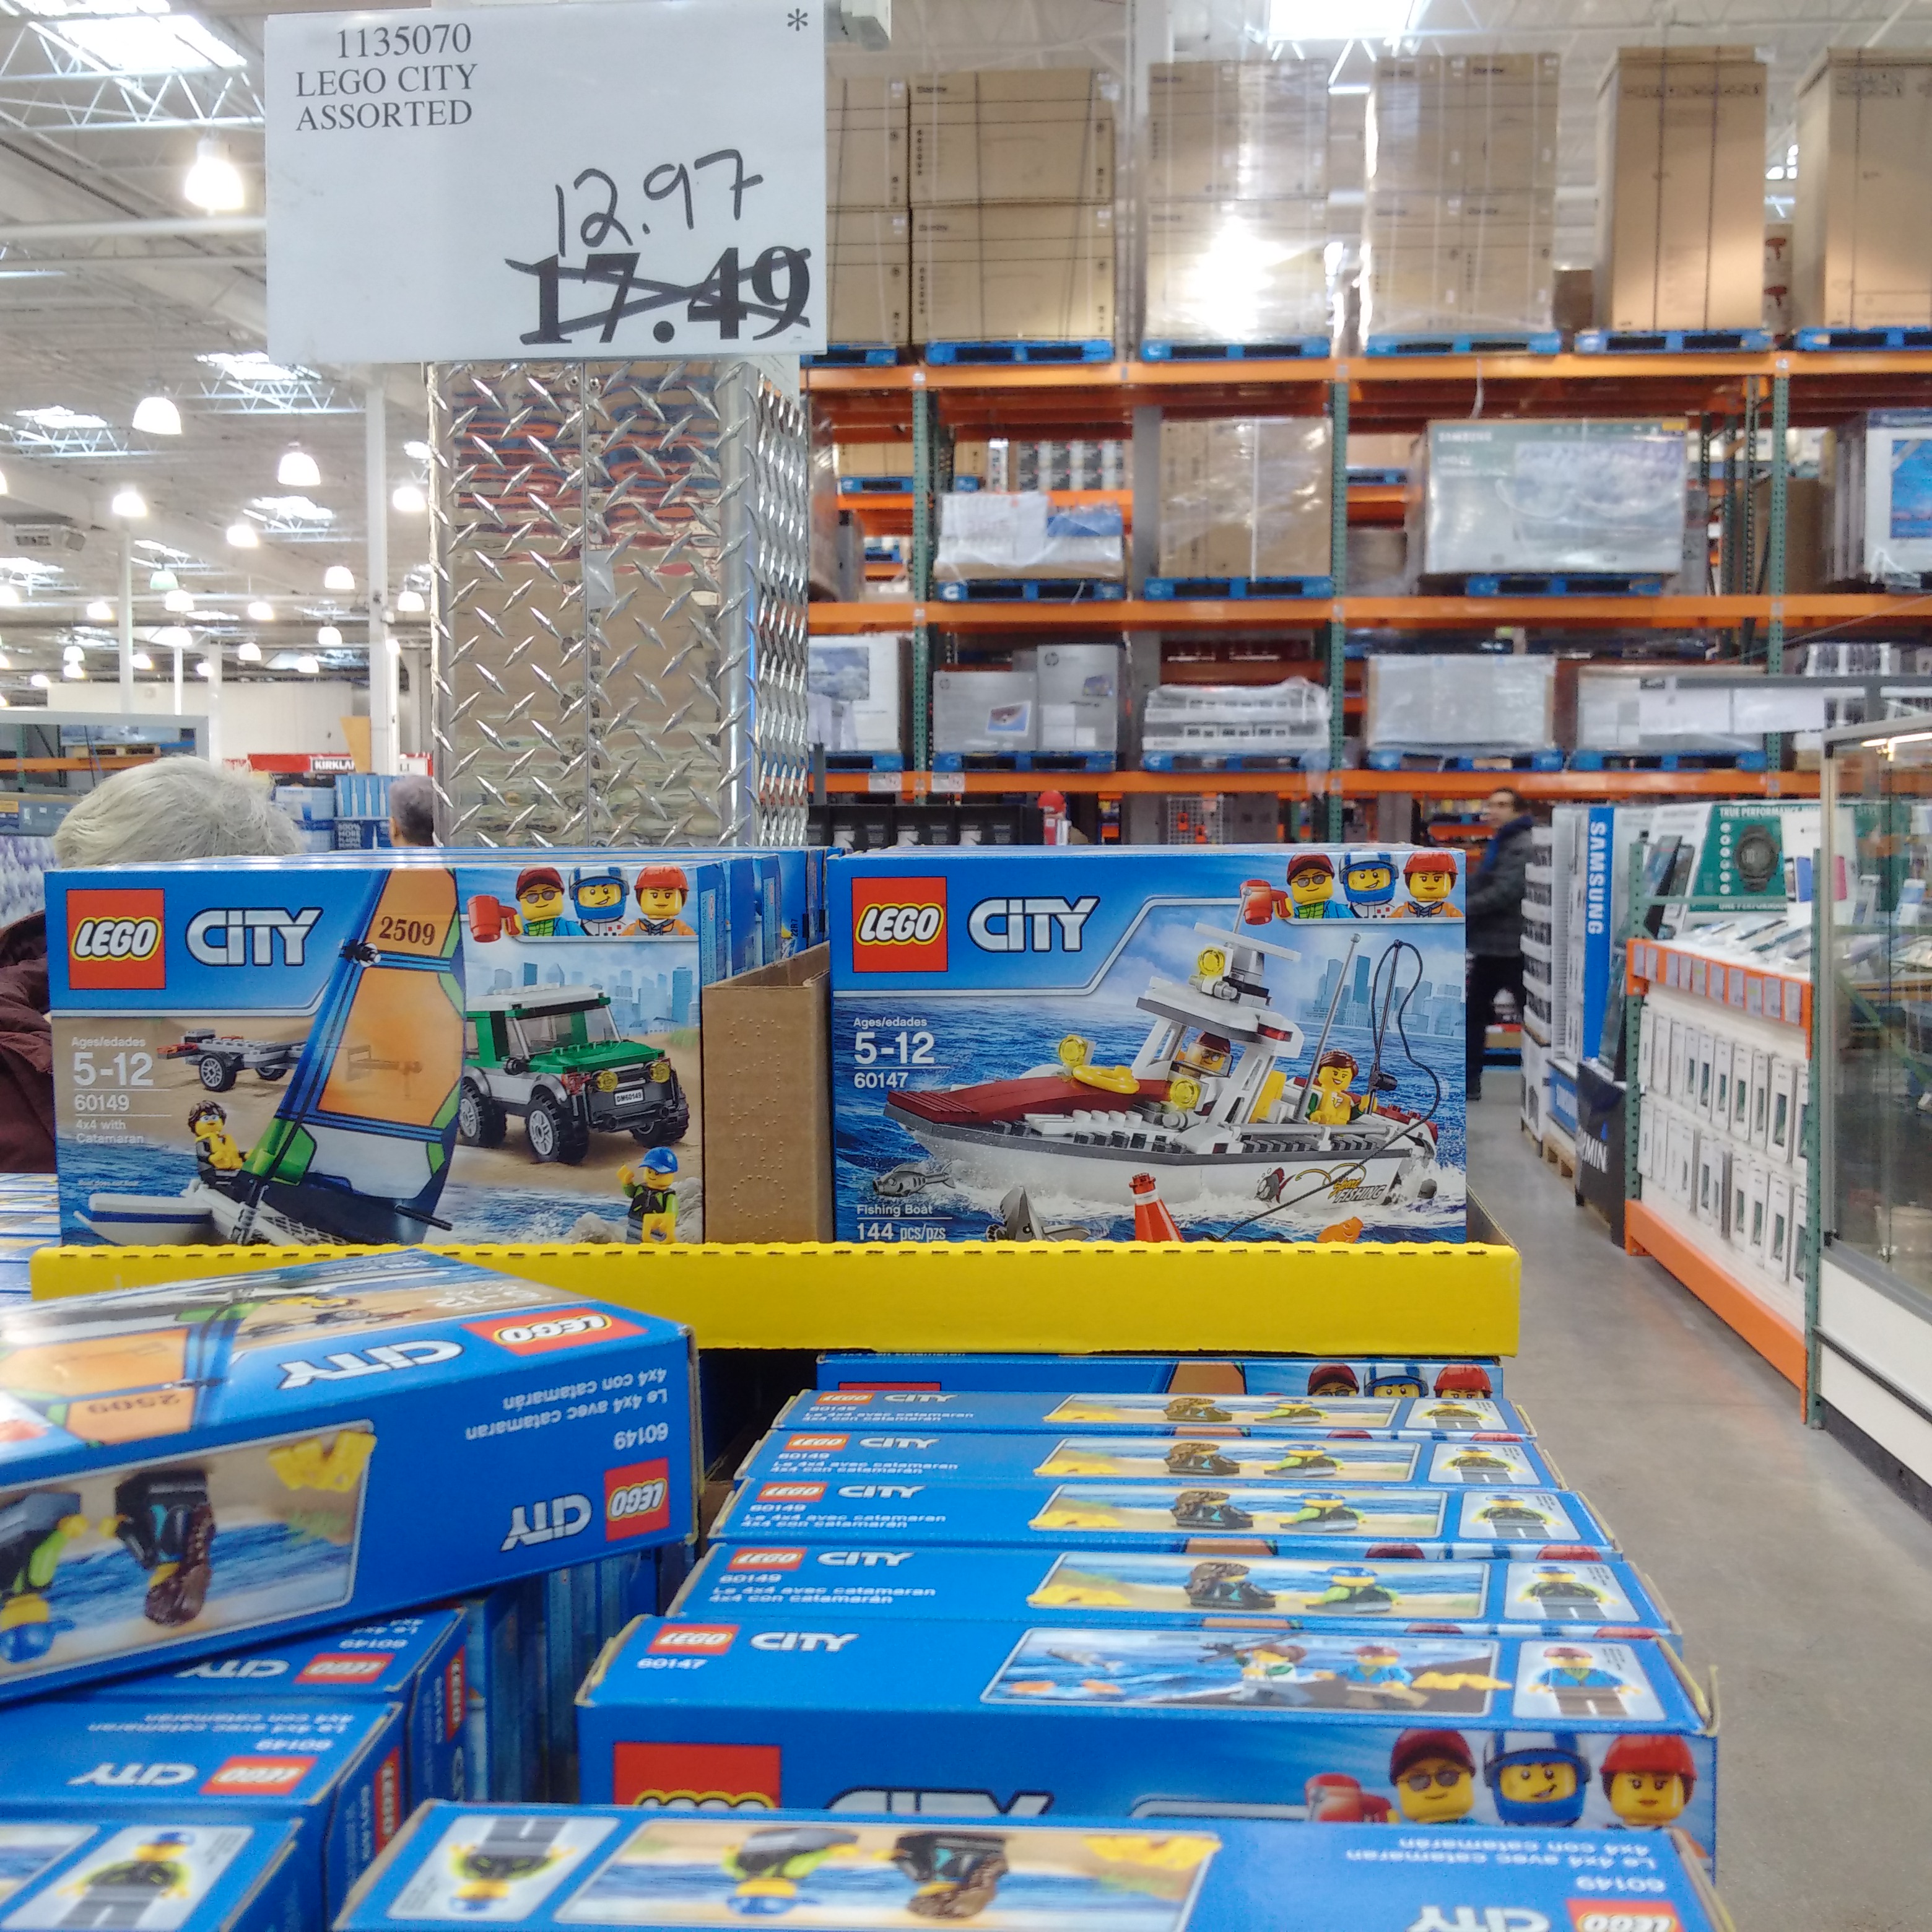 Costco Canada Unadvertised Deals of the week starting Nov. 13th and some markdowns too! - Save ...